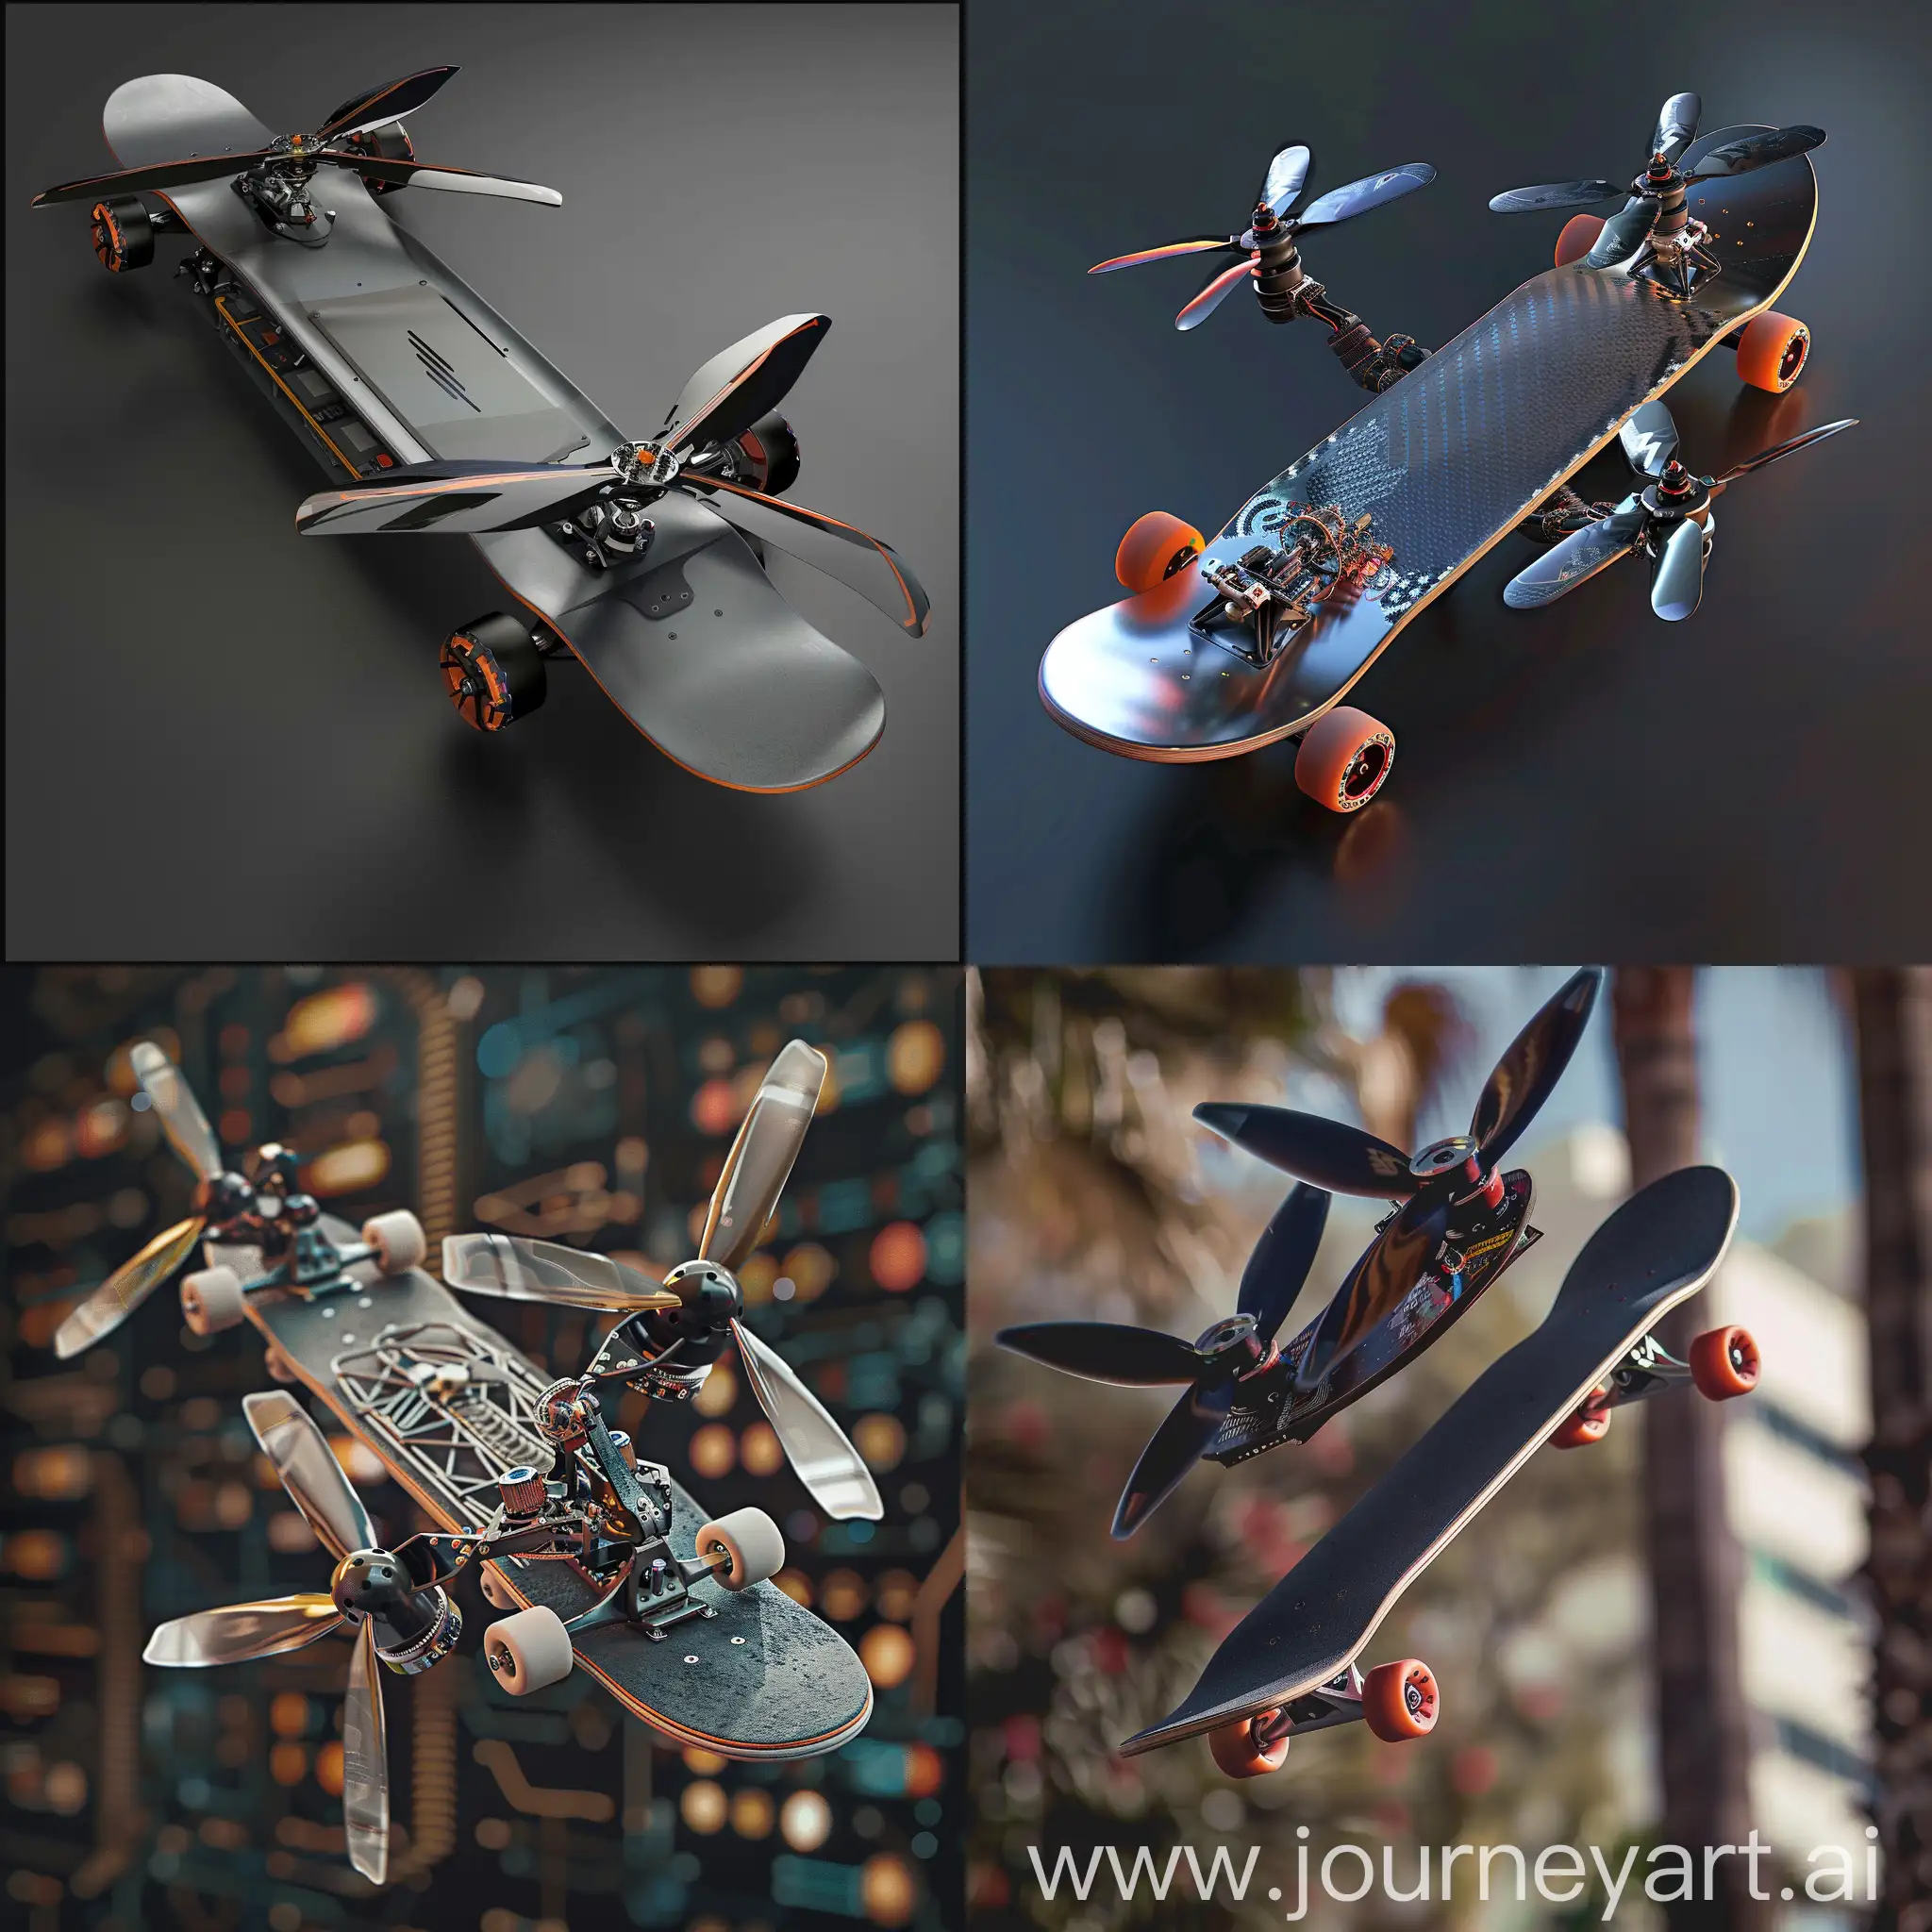 Cybernetic-Skateboard-with-Propeller-Blades